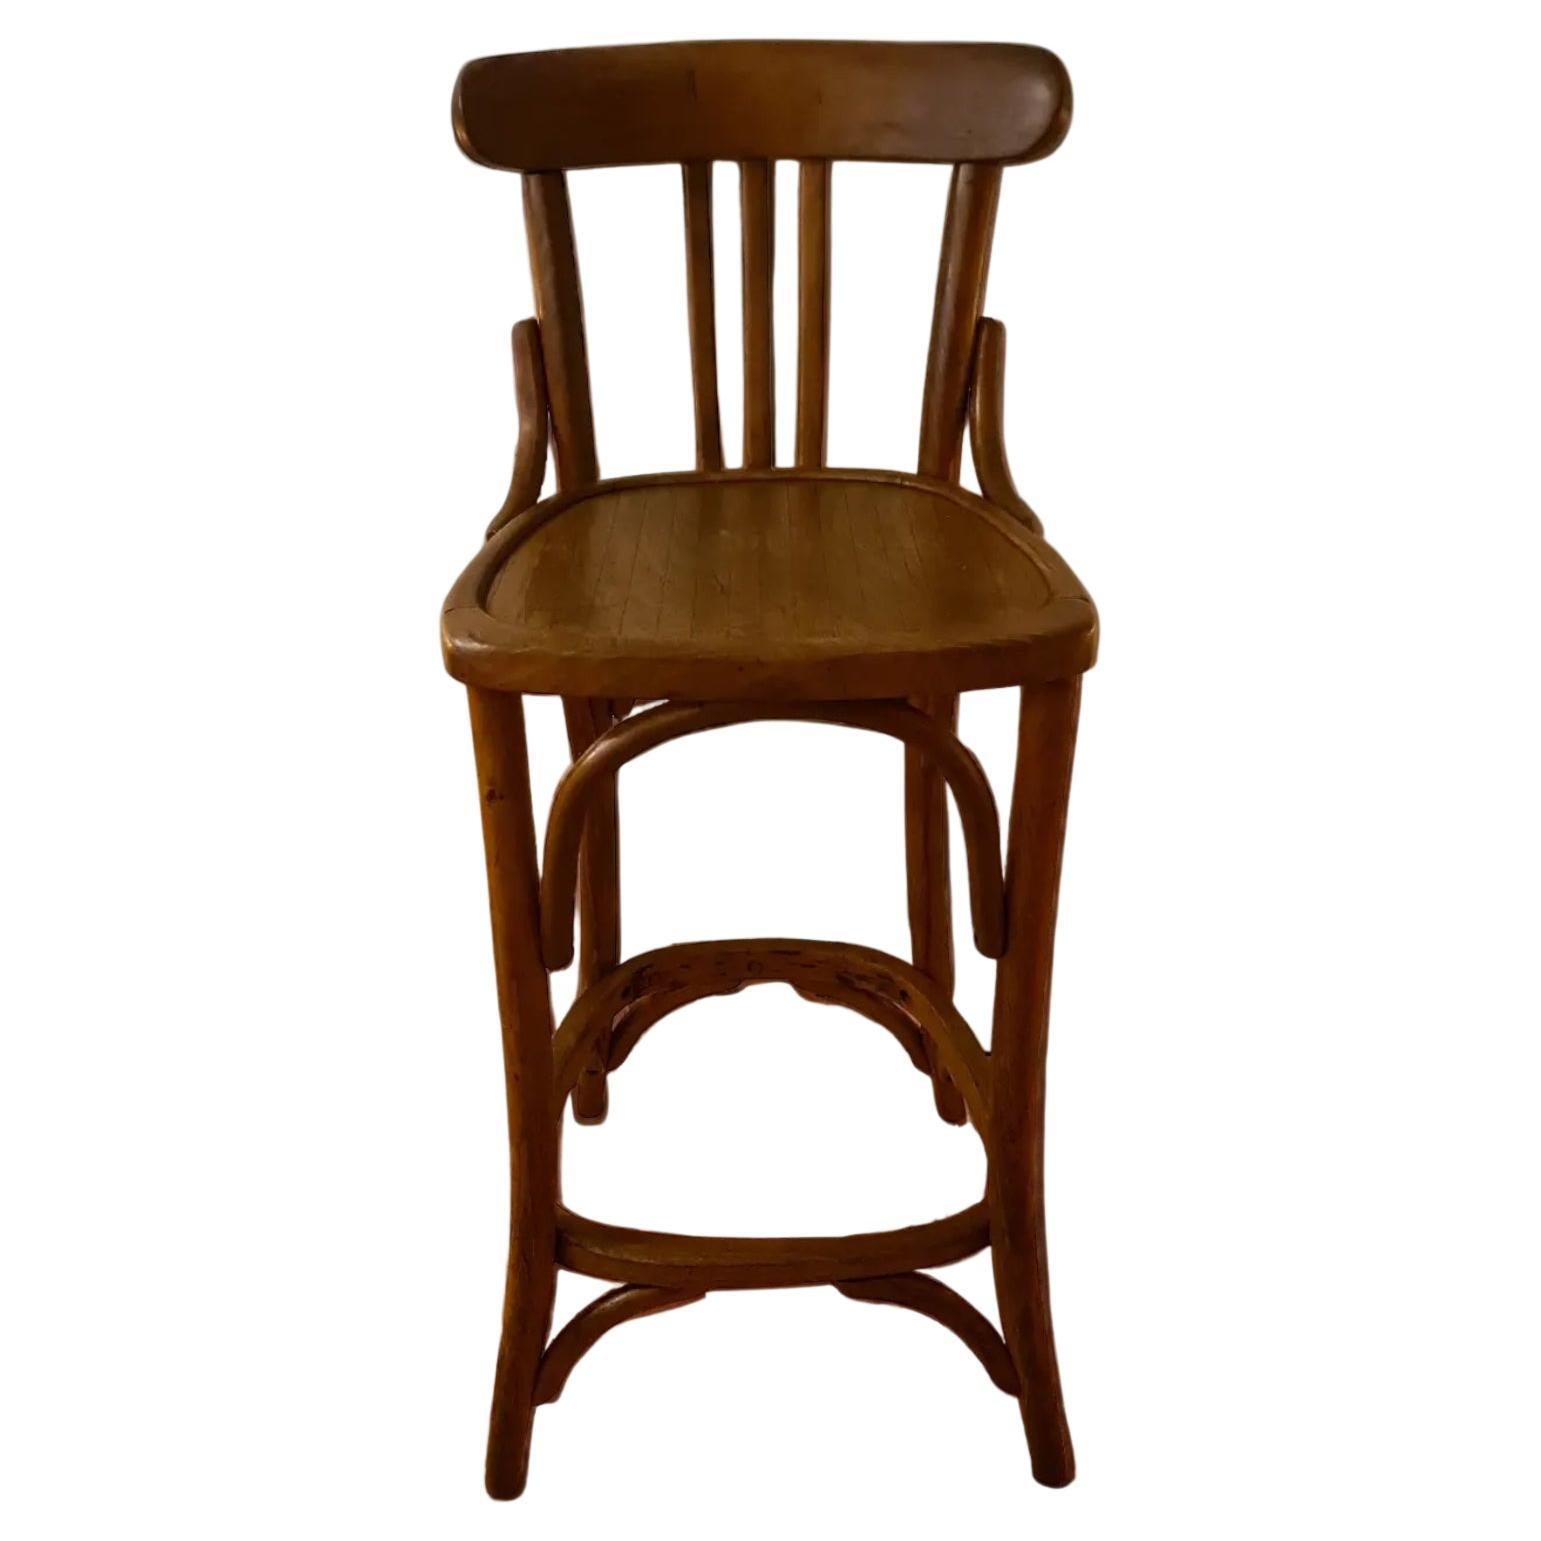 Thonet Style High Stool in Curved Wood, 20th Century